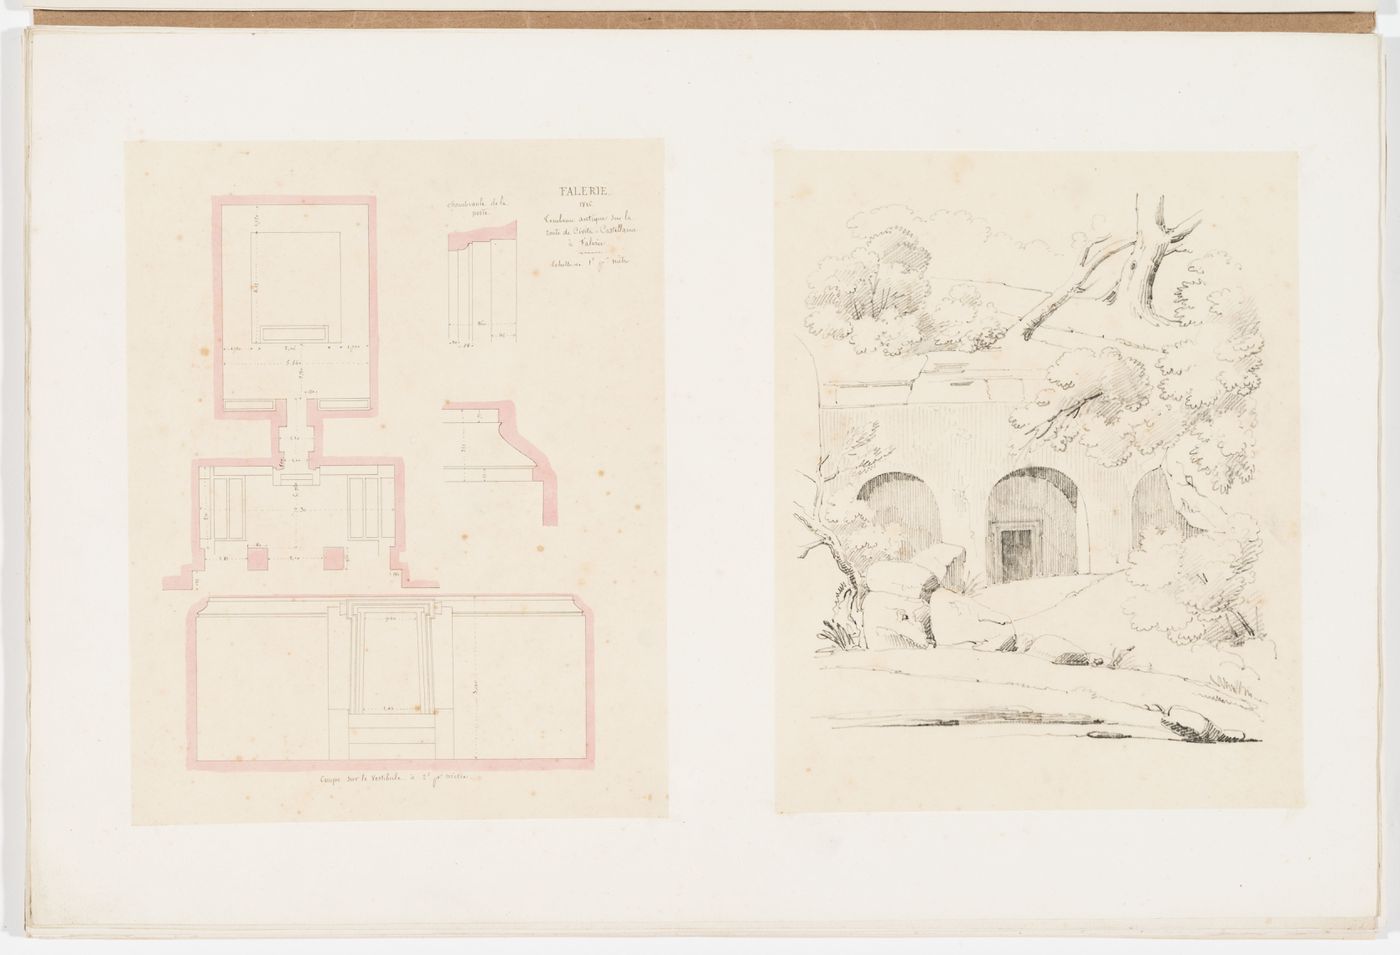 Plan, section and molding details of the ancient tomb on the road to Civita Castellana (Falerii) and a sketch of the exterior of the tomb and its surroundings